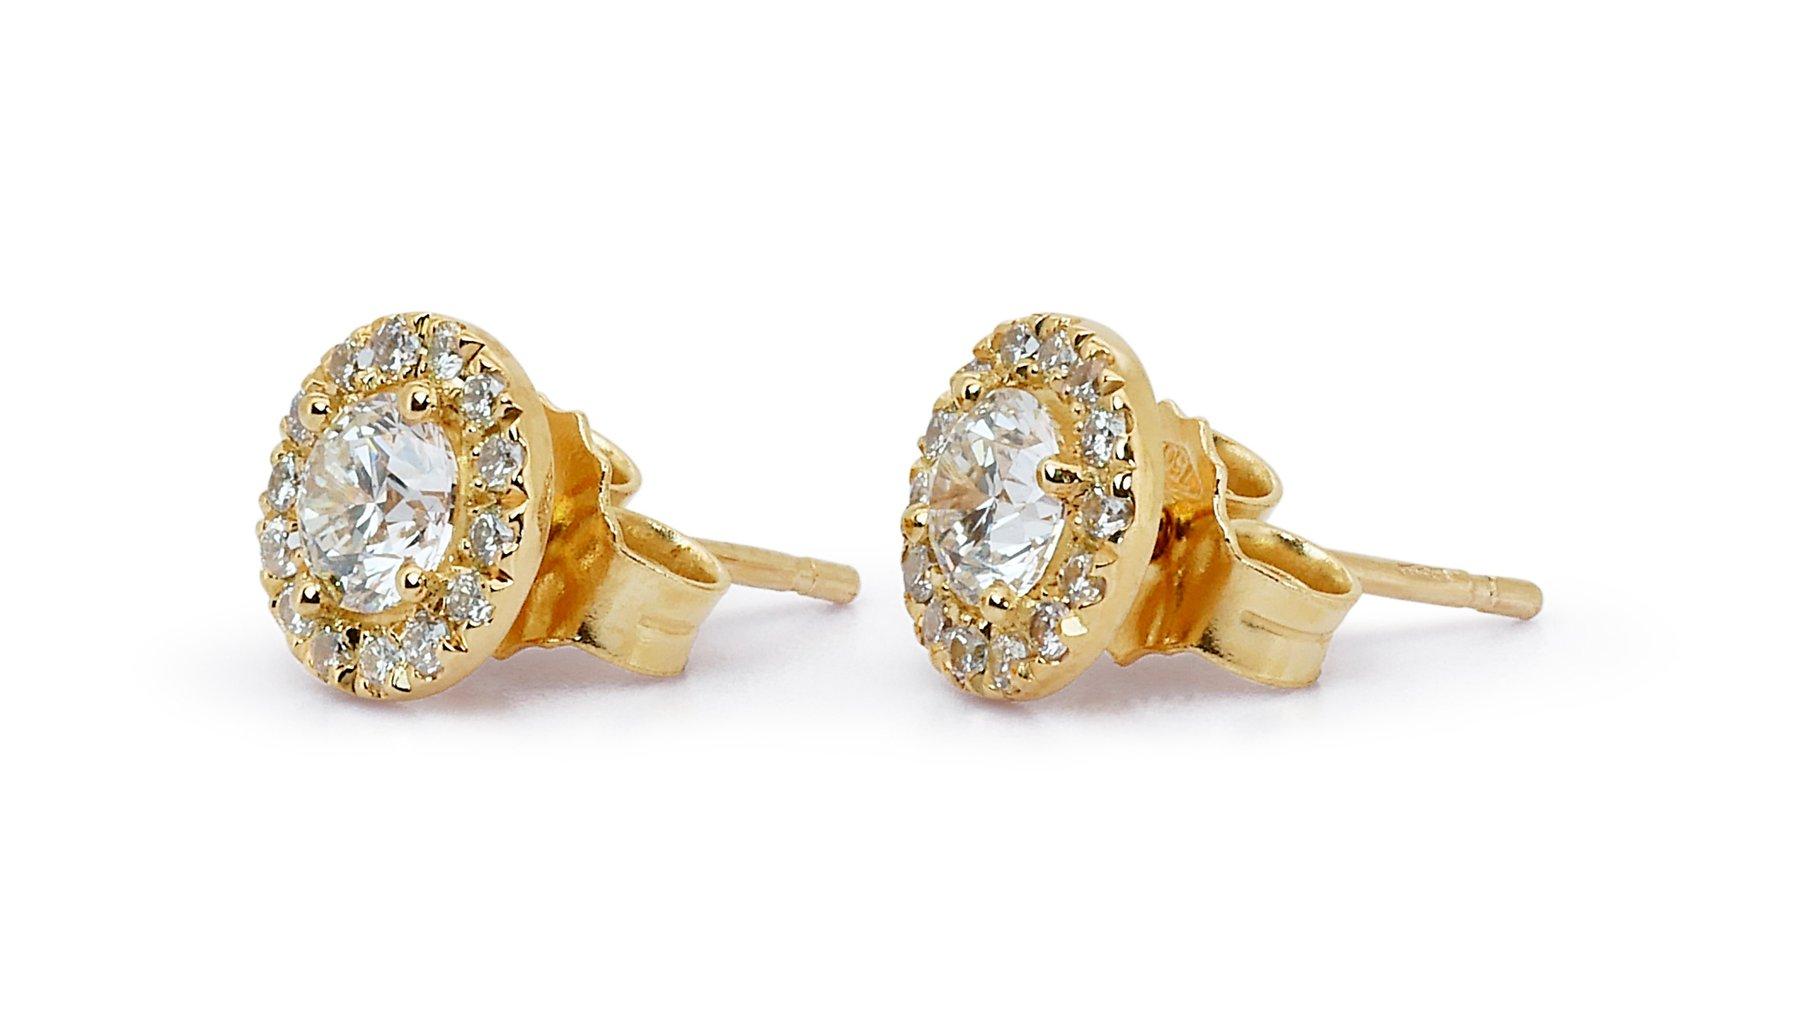 Elegant 18 kt. Yellow Gold Earrings with 1.5 ct Natural Diamond GIA Certificate 3